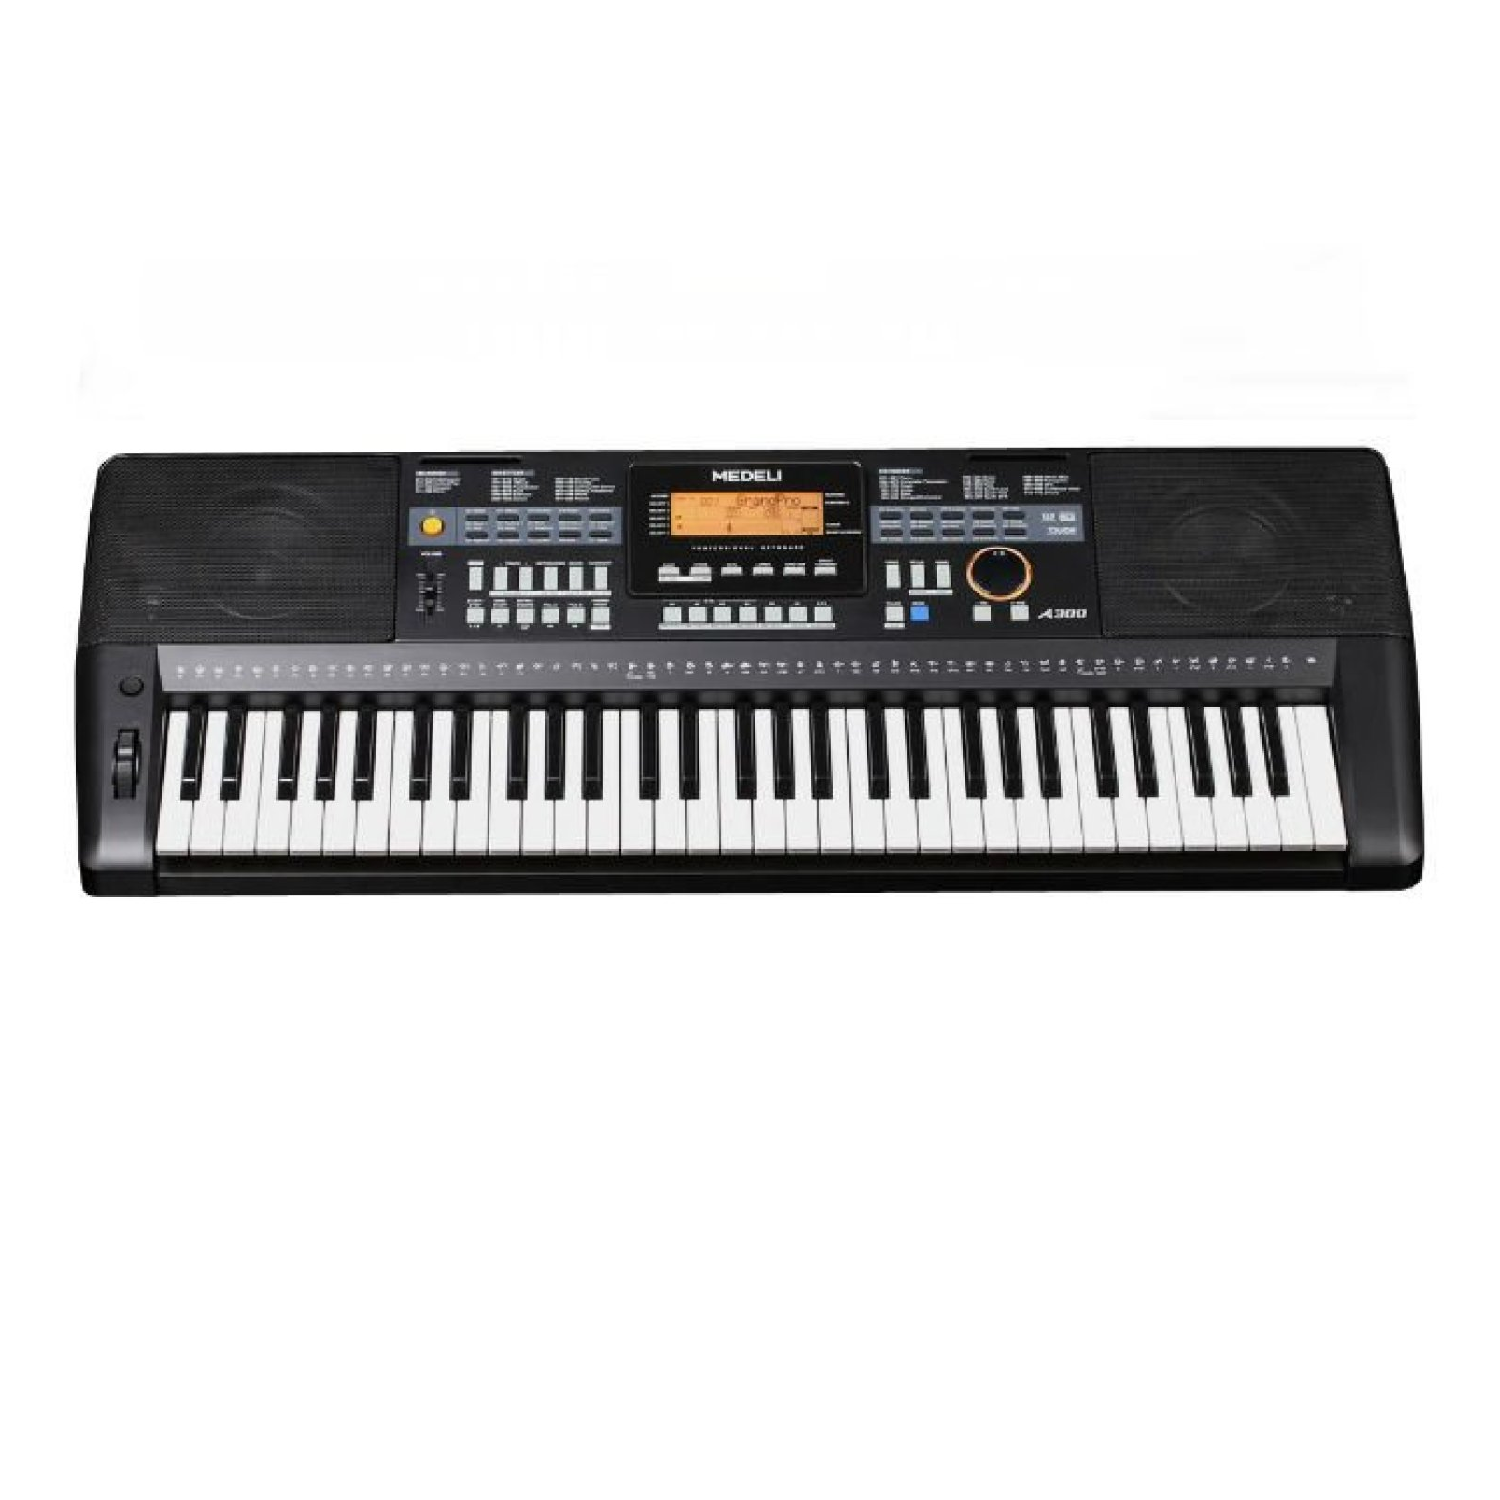 61 Keys with Touch Response 583 Voices; 10 User, 230 Styles; 5 User, 60 Songs 2 Demo Songs, 64 Note Polyphony Aux Out, MIDI, USB Port   A800 medeli